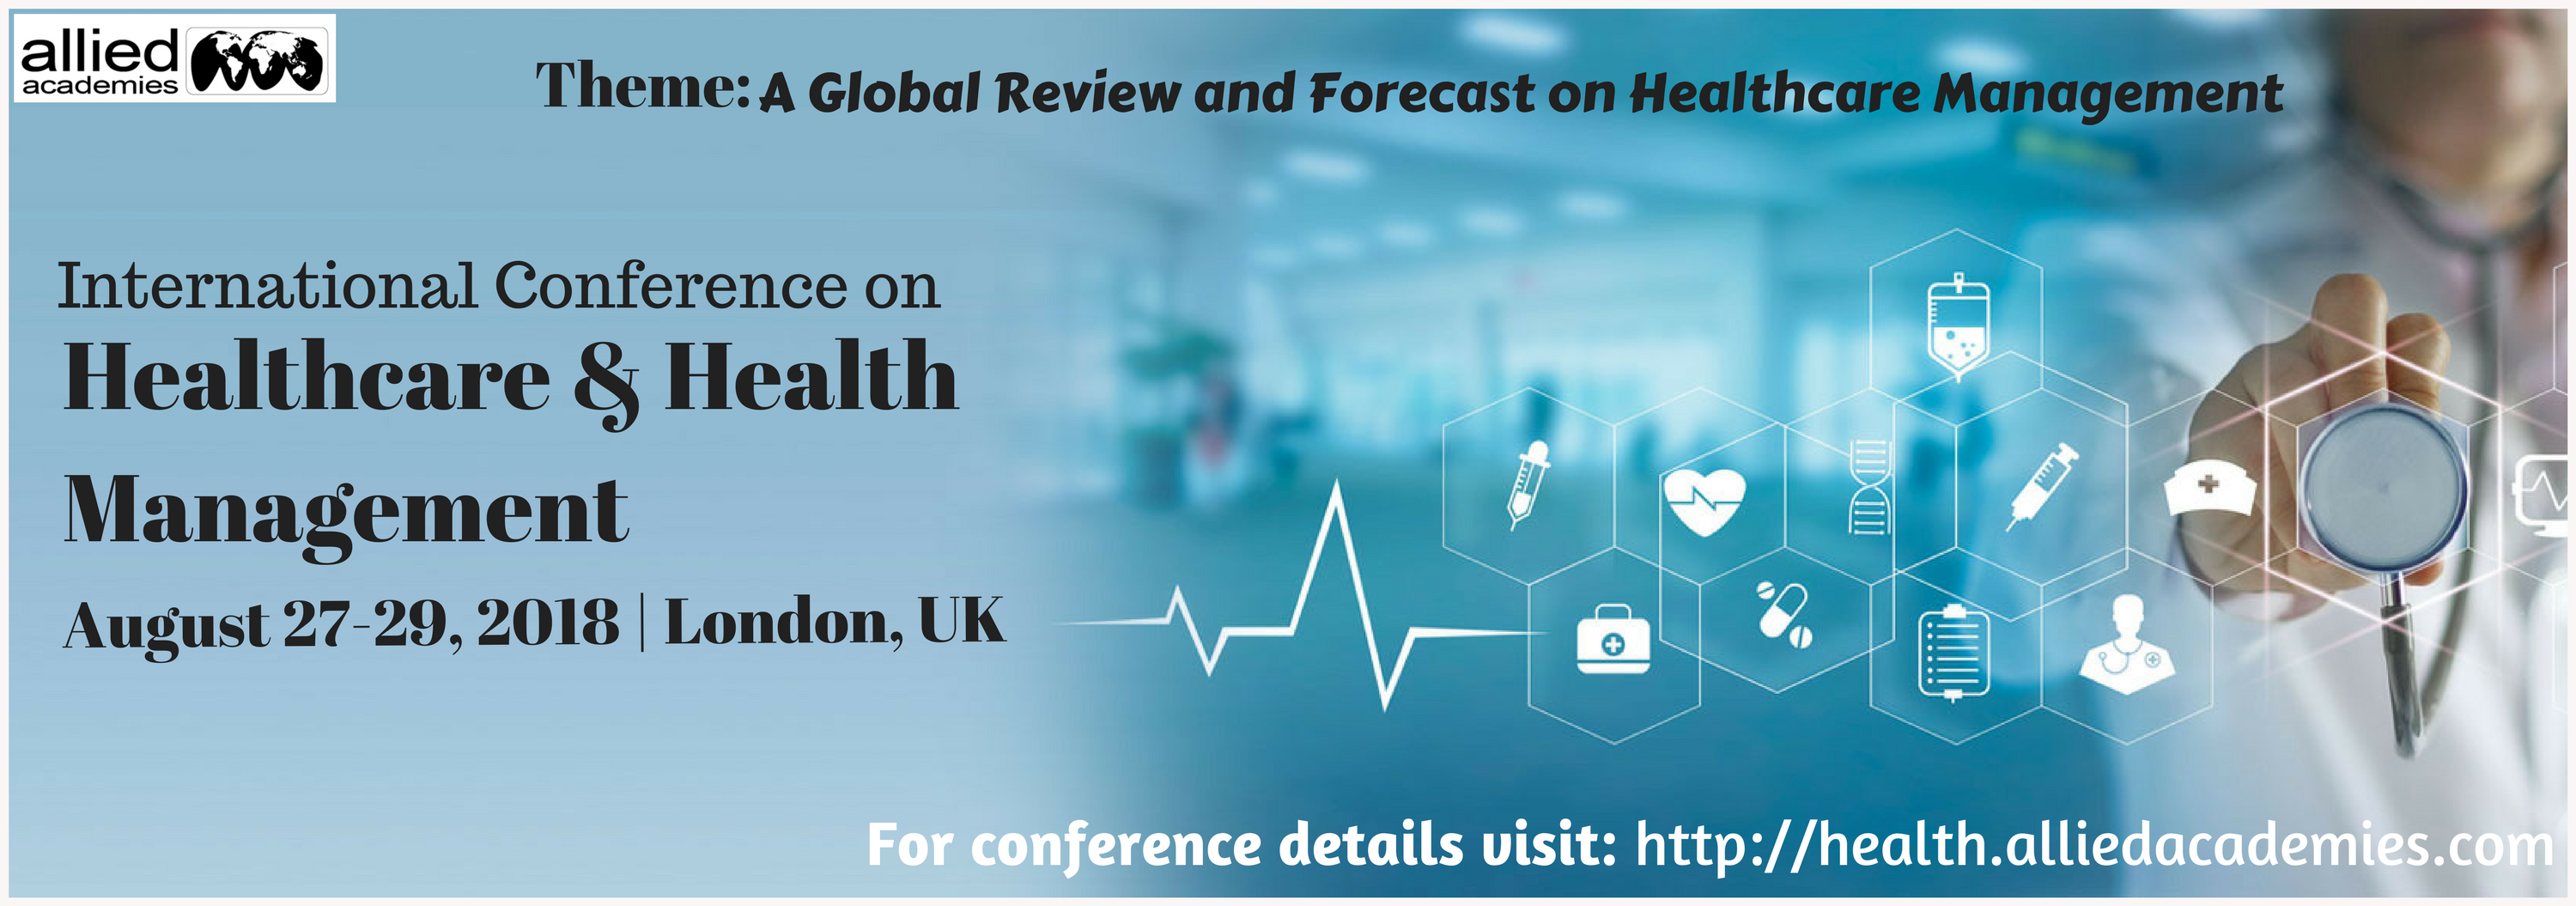 International Conference on Healthcare and Health Management, London, United Kingdom